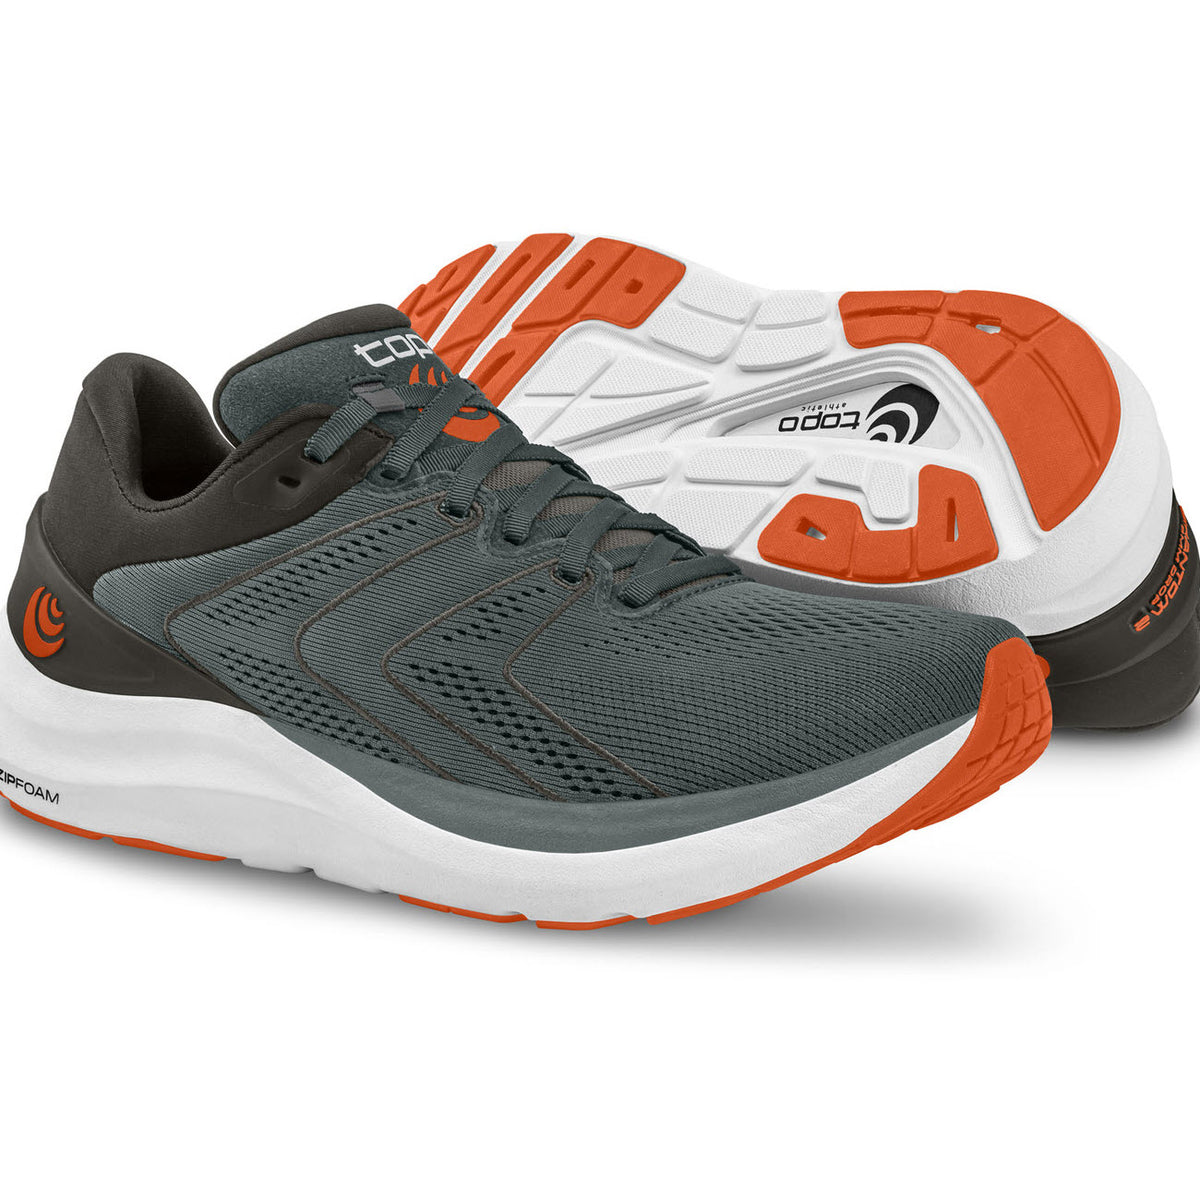 A pair of Topo Phantom 2 gray and orange running shoes with cushioned soles, designed as a daily training option and featuring a wider toe-box.